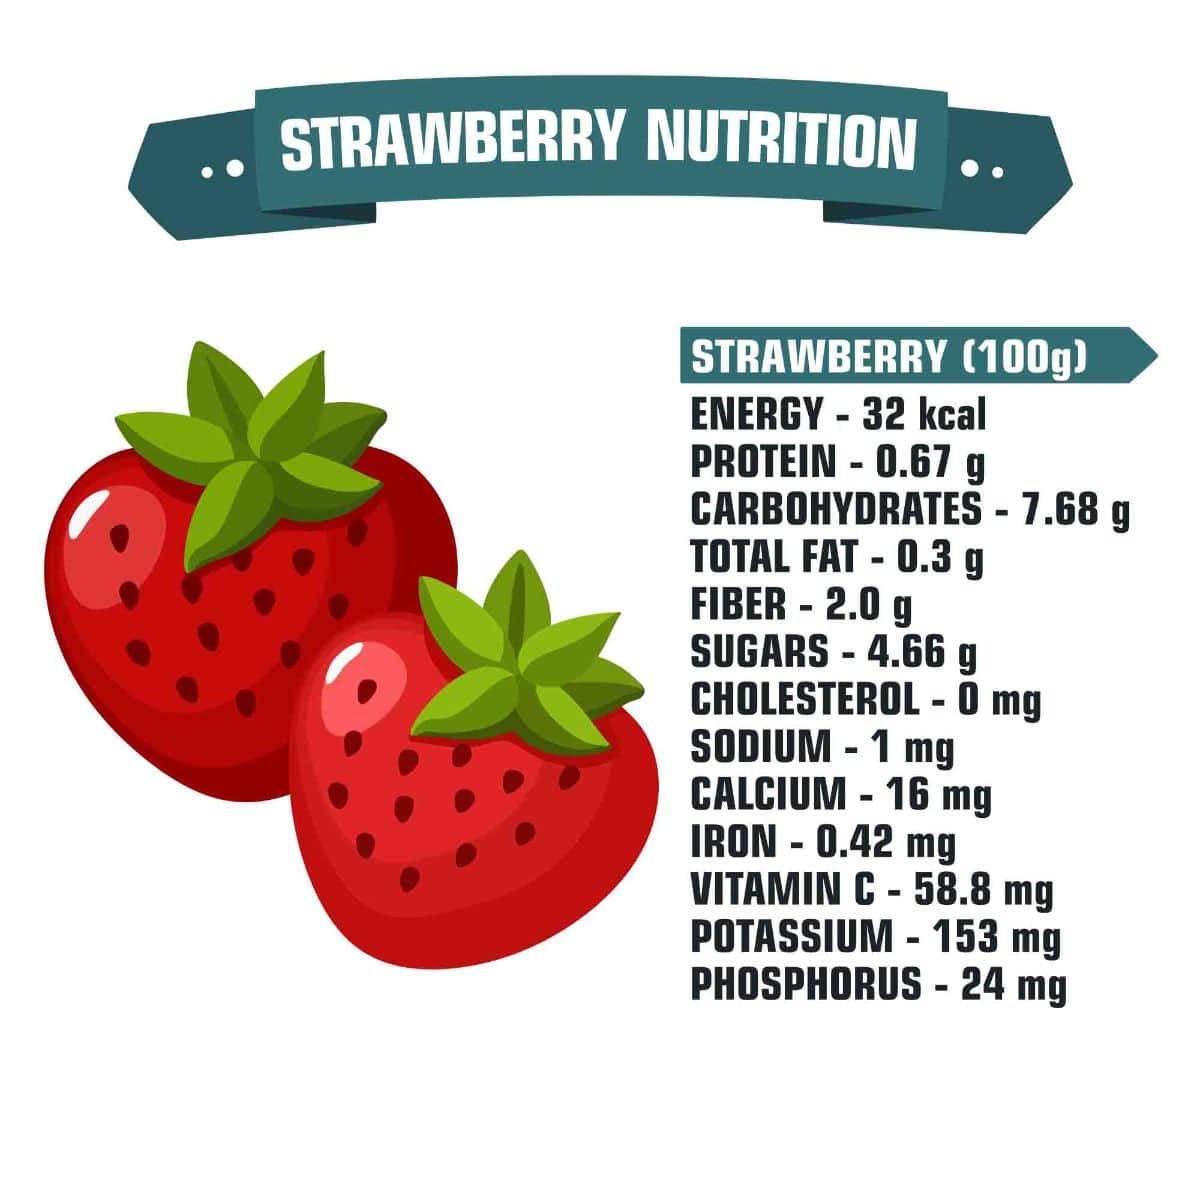 Strawberry nutrition poster